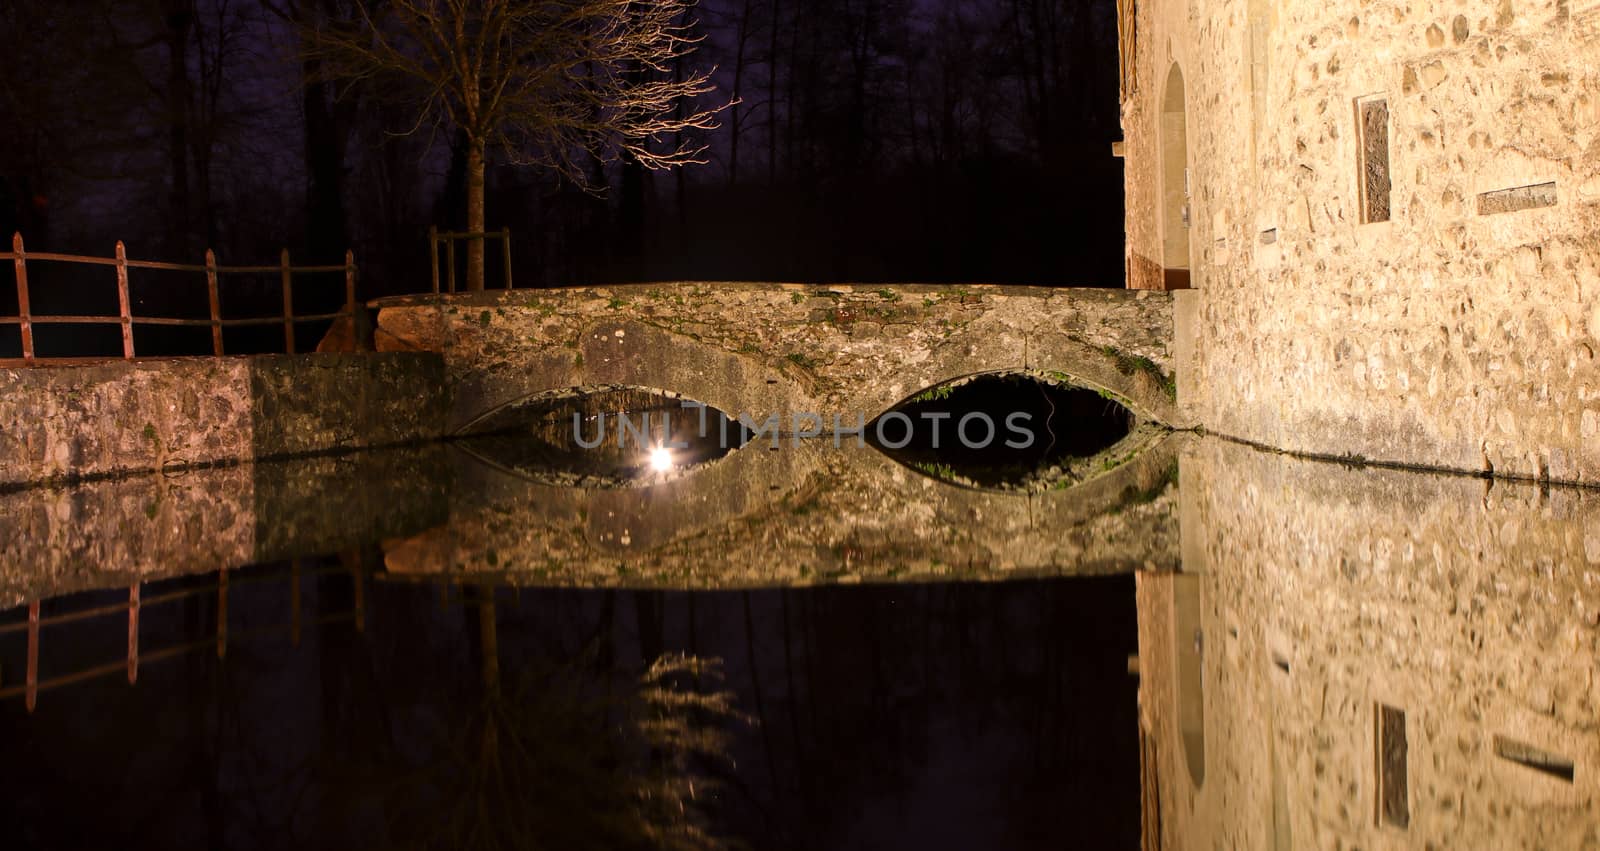 Bridge over water with reflection in the water. by PeterHofstetter